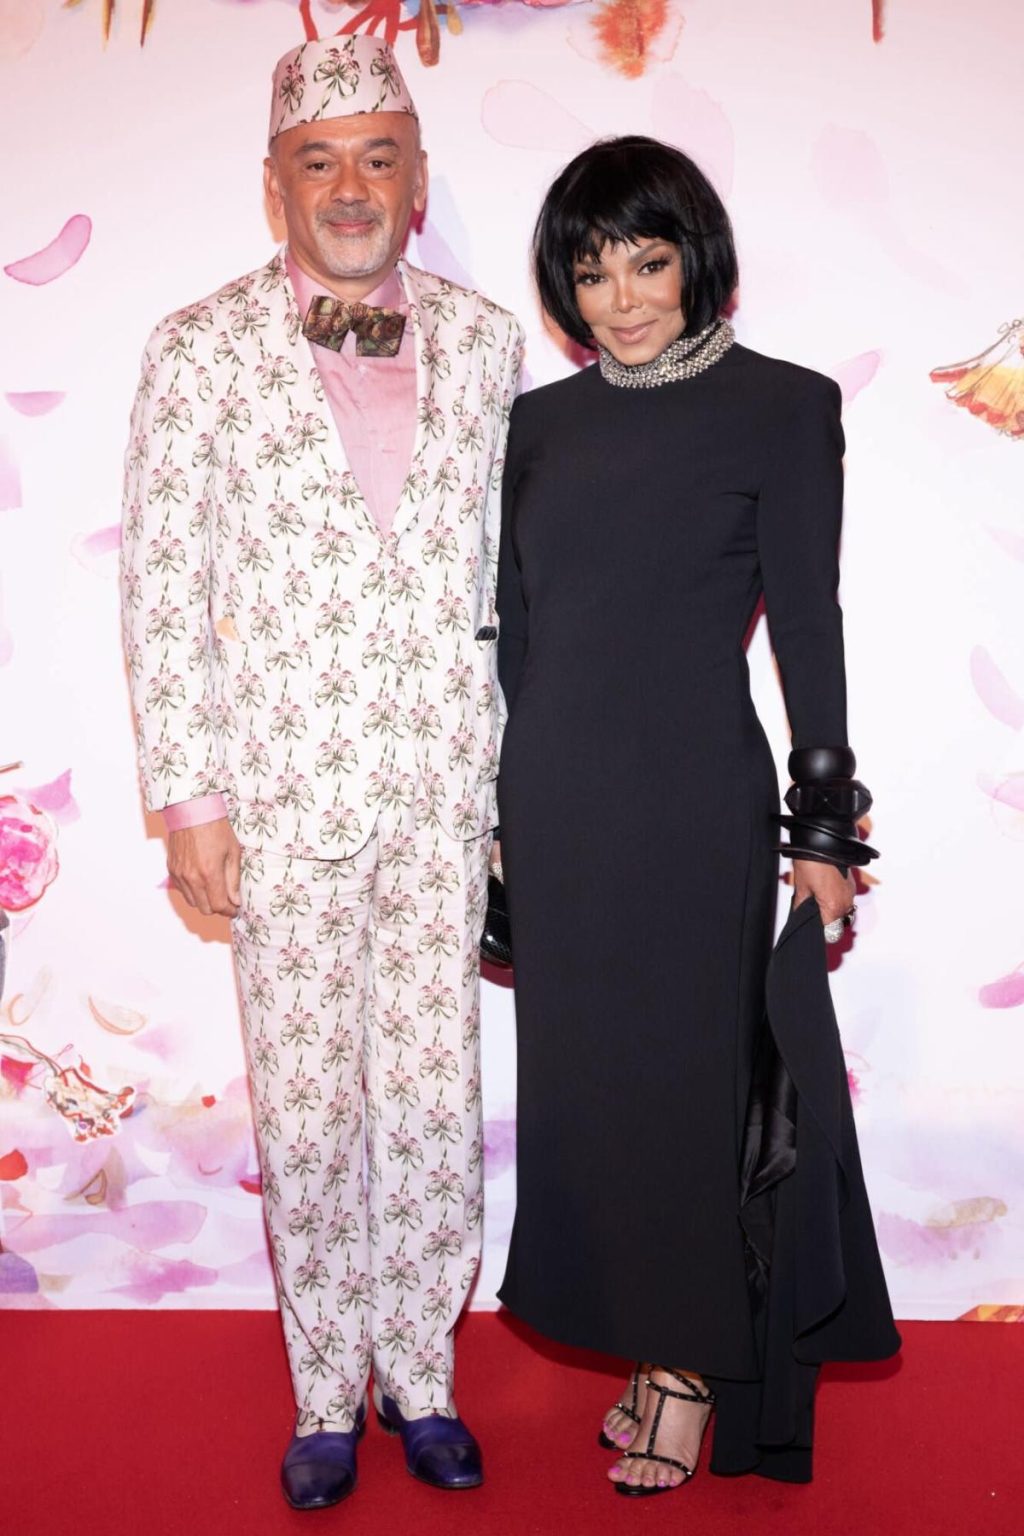 Janet Jackson looks elegant in black posing with Christian Louboutin at the Rose Ball in Monaco